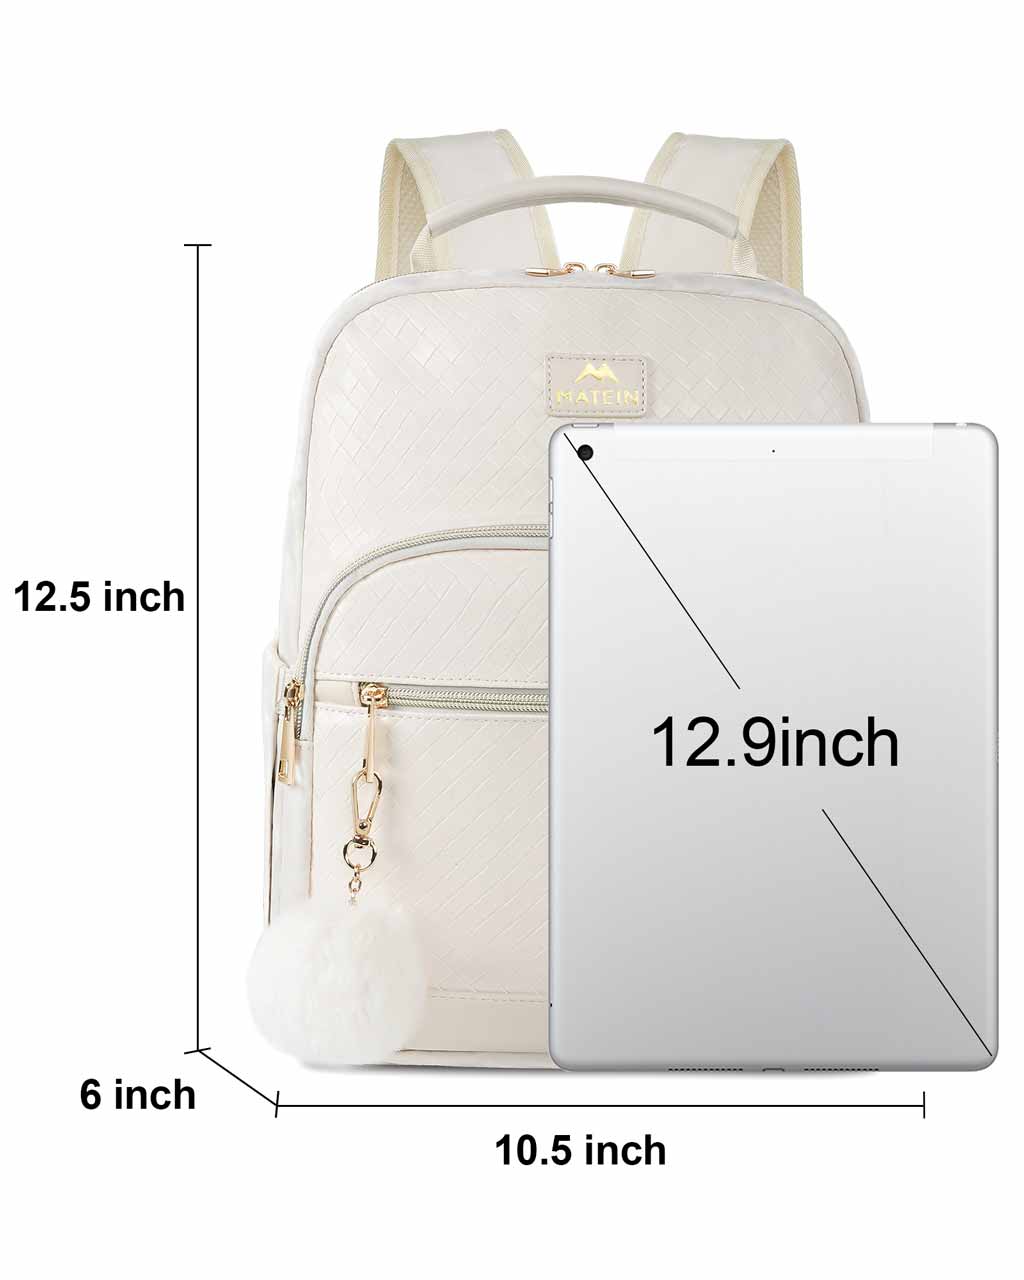 Matein Small Purse Backpack for Women